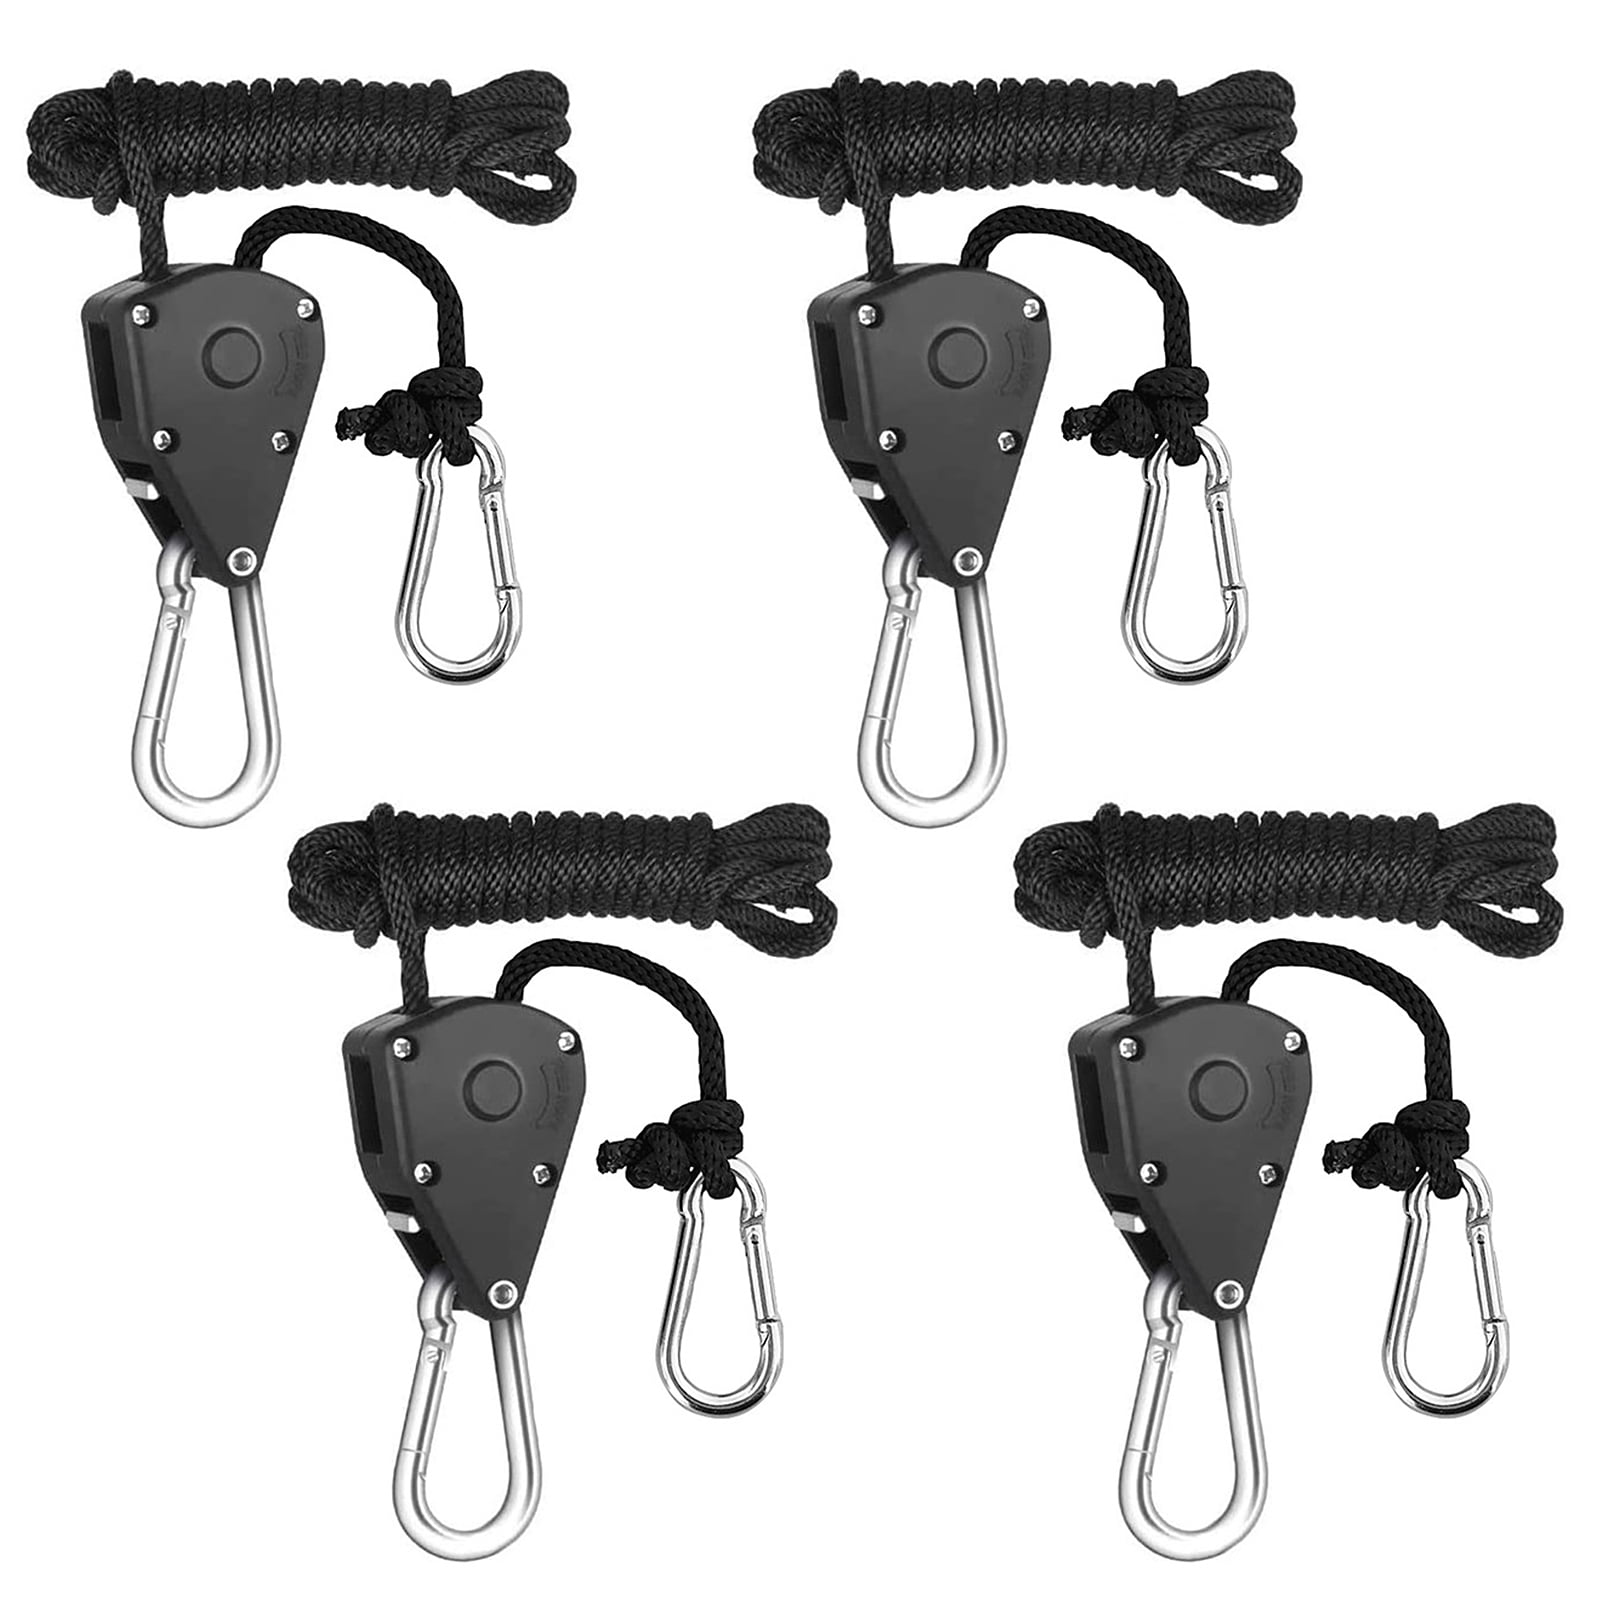 Tomfoto 4pcs Pulley Ratchets Heavy Duty Rope Clip Hanger Adjustable Lifting  Pulley Lanyard Hanger Kayak And Canoe Boat Bow Rope Lock Tie Down Strap 